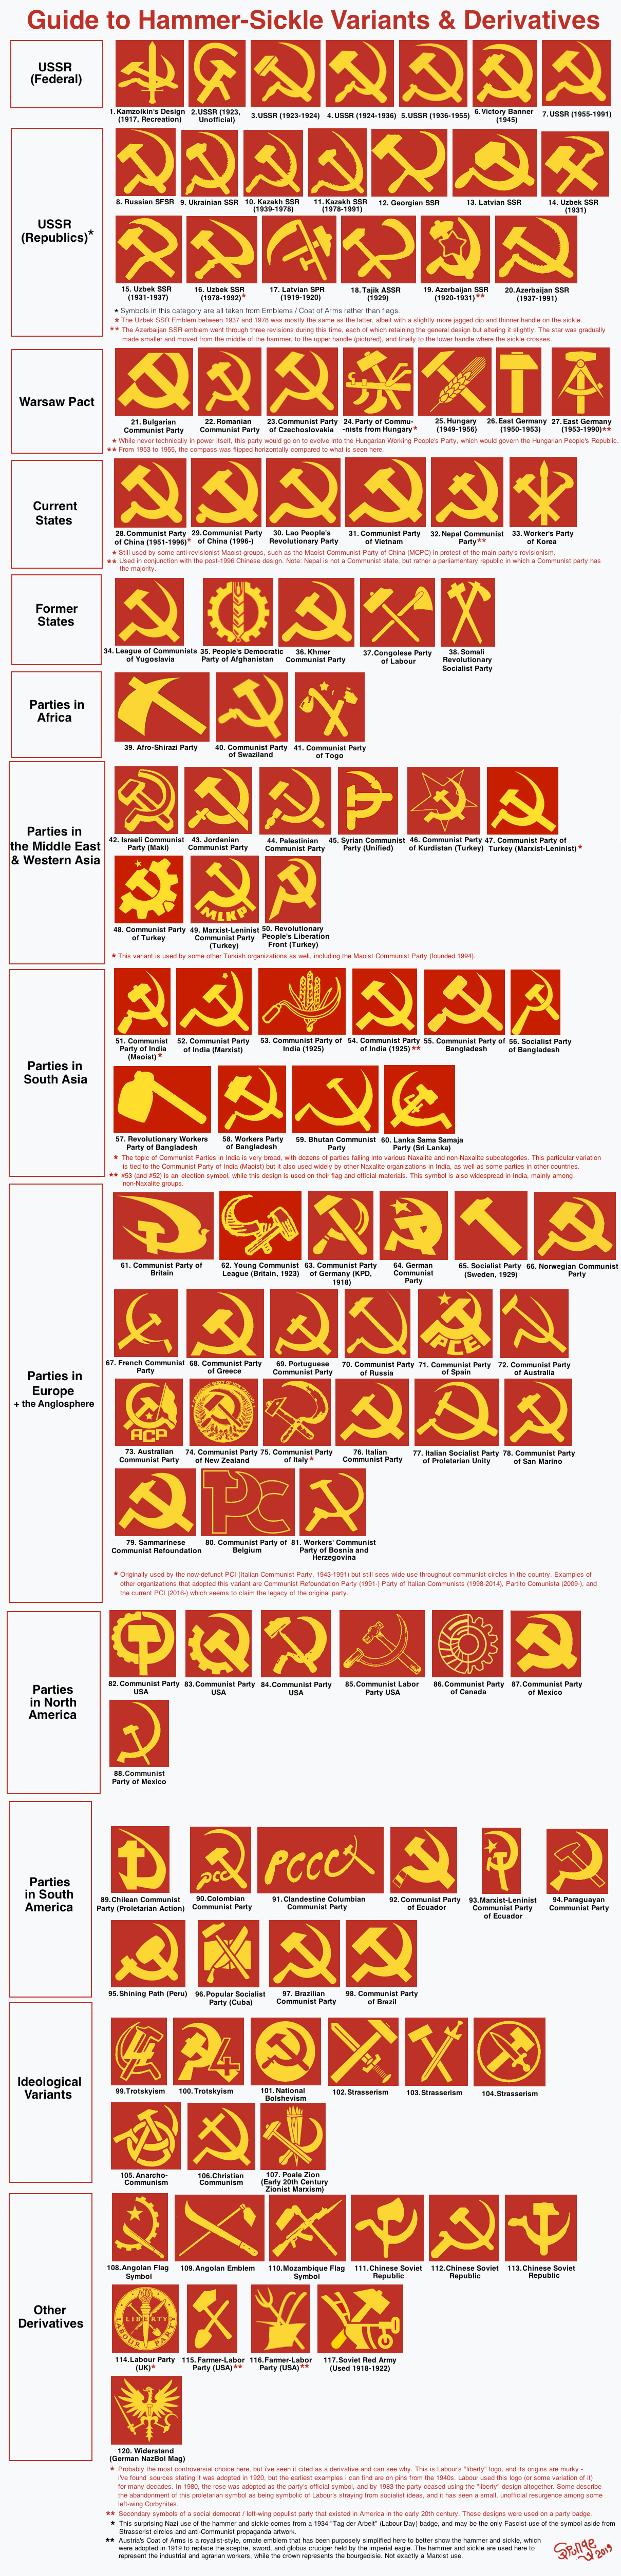 File:Hammer and sickle variants.png